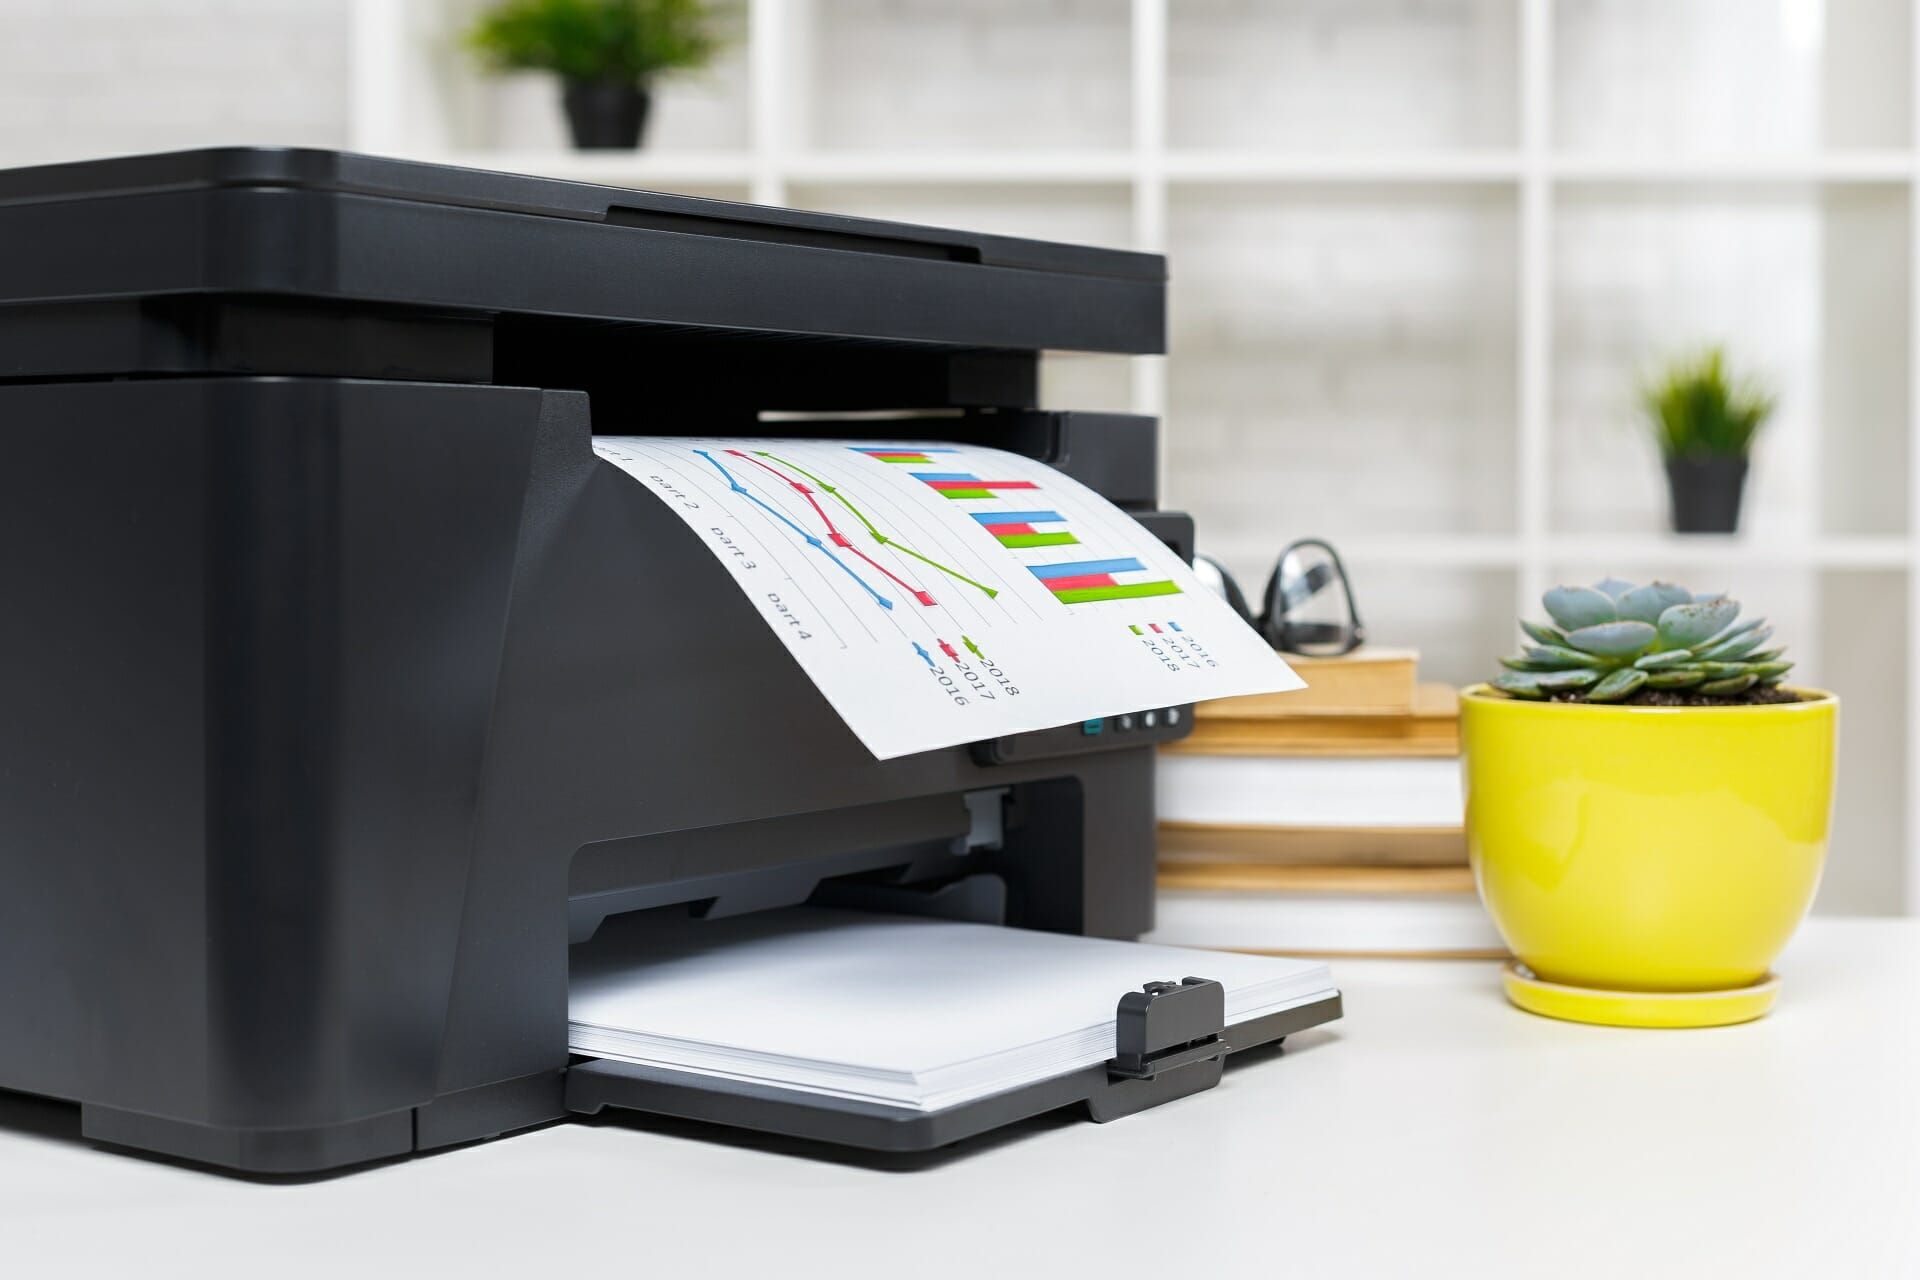 What Does An All-In-One Printer Mean